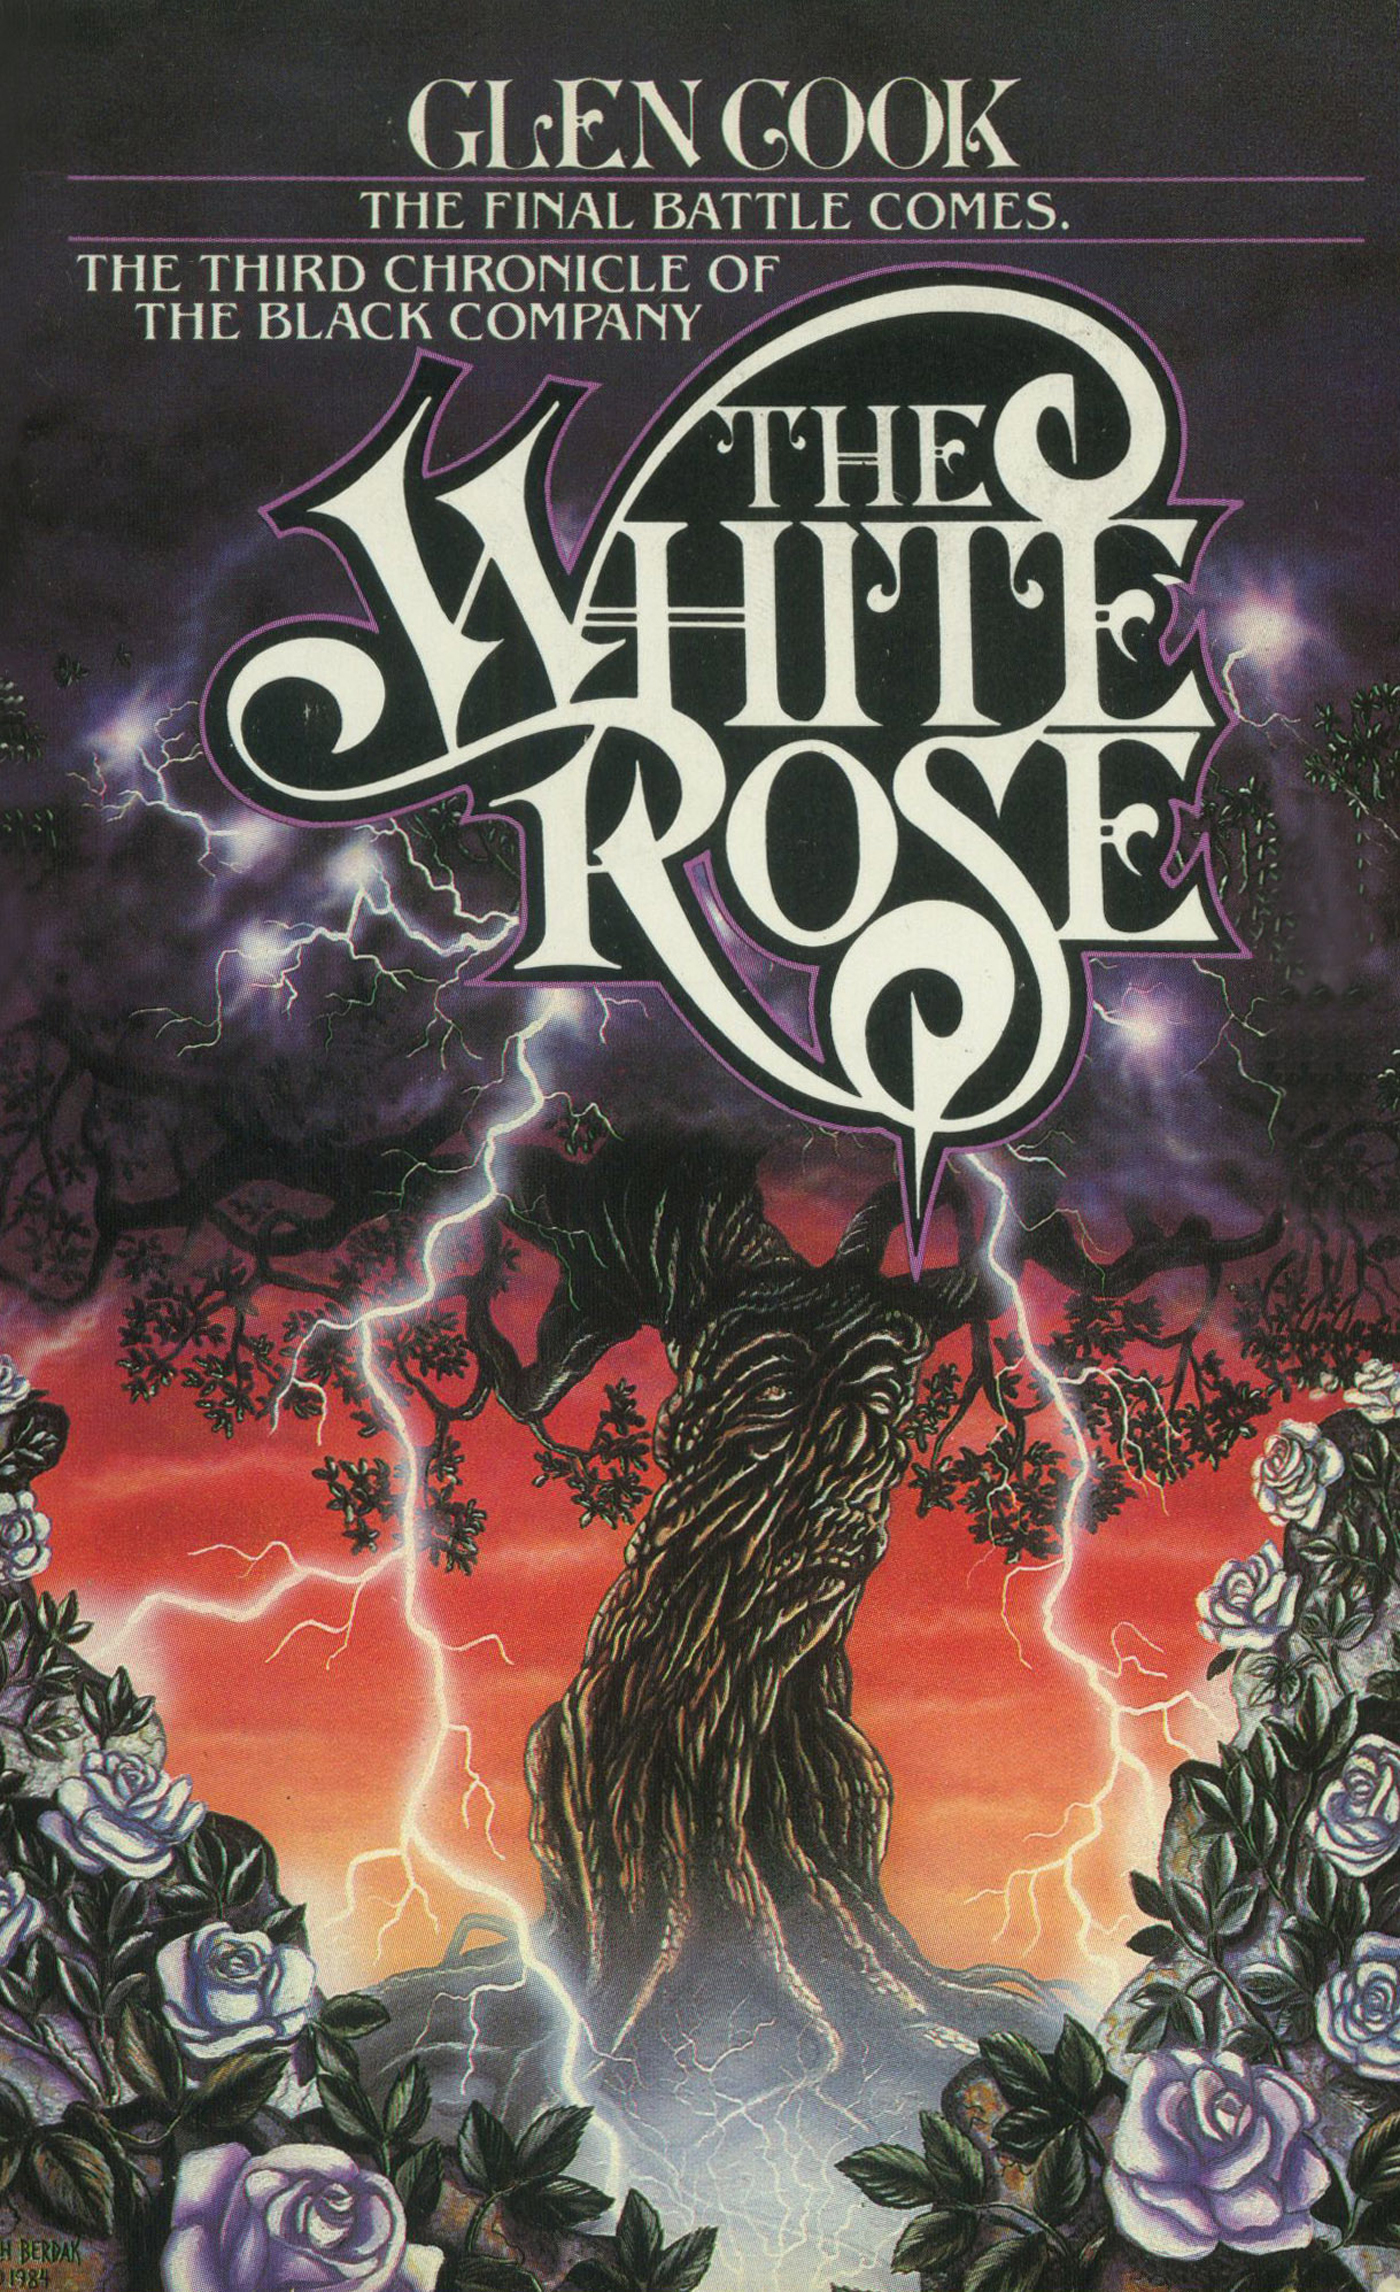 The White Rose : A Novel of the Black Company by Glen Cook